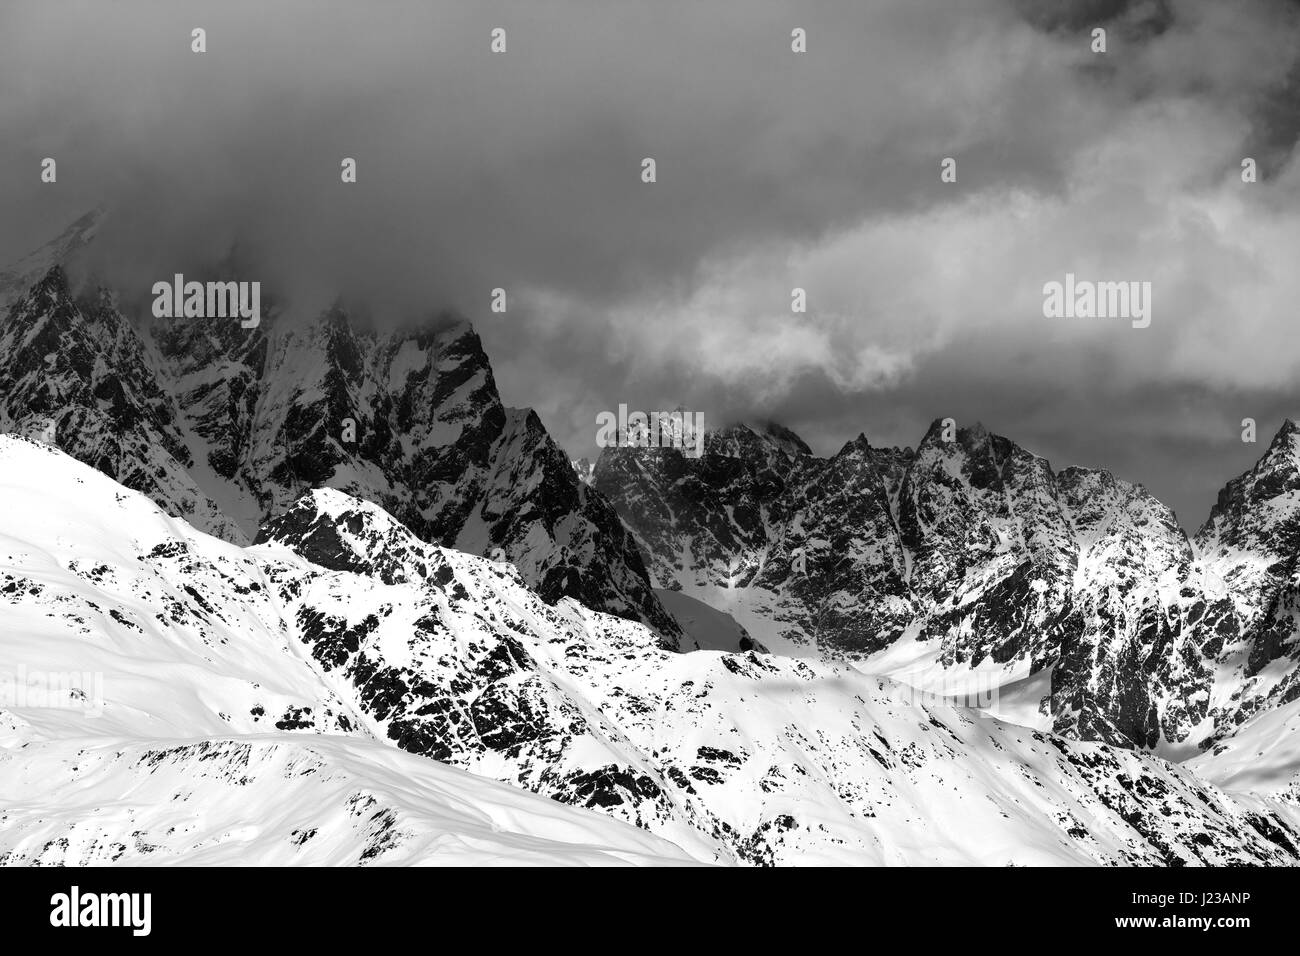 Black and white snowy rocks in clouds at sunny day. Caucasus Mountains. Georgia, region Svaneti. Stock Photo